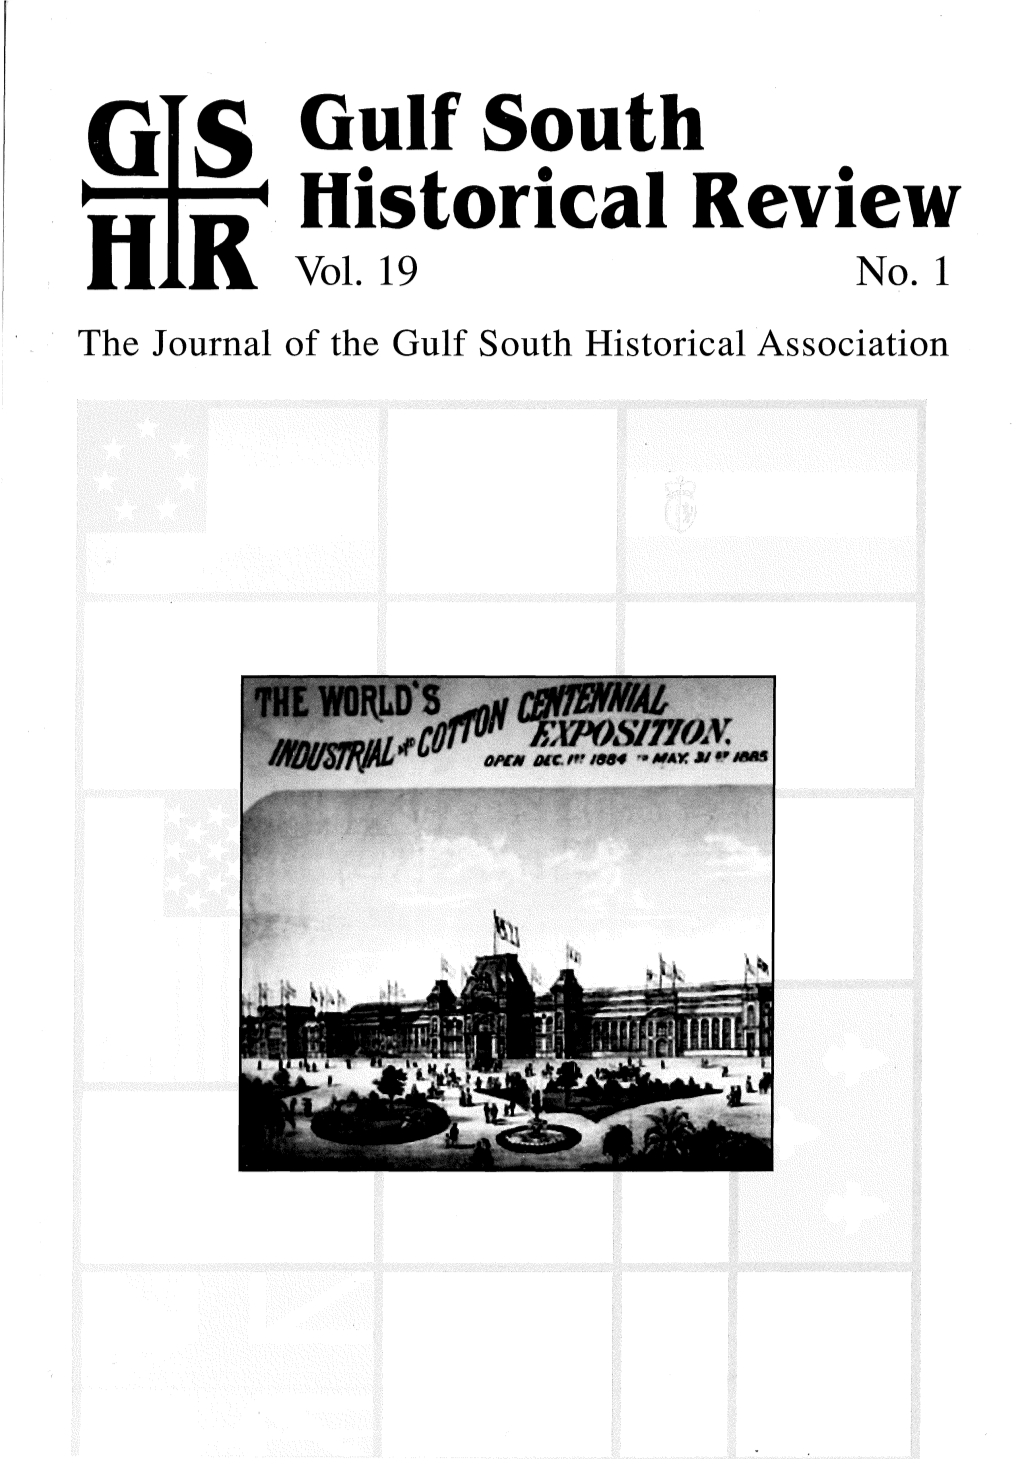 Historical Review H K Vol